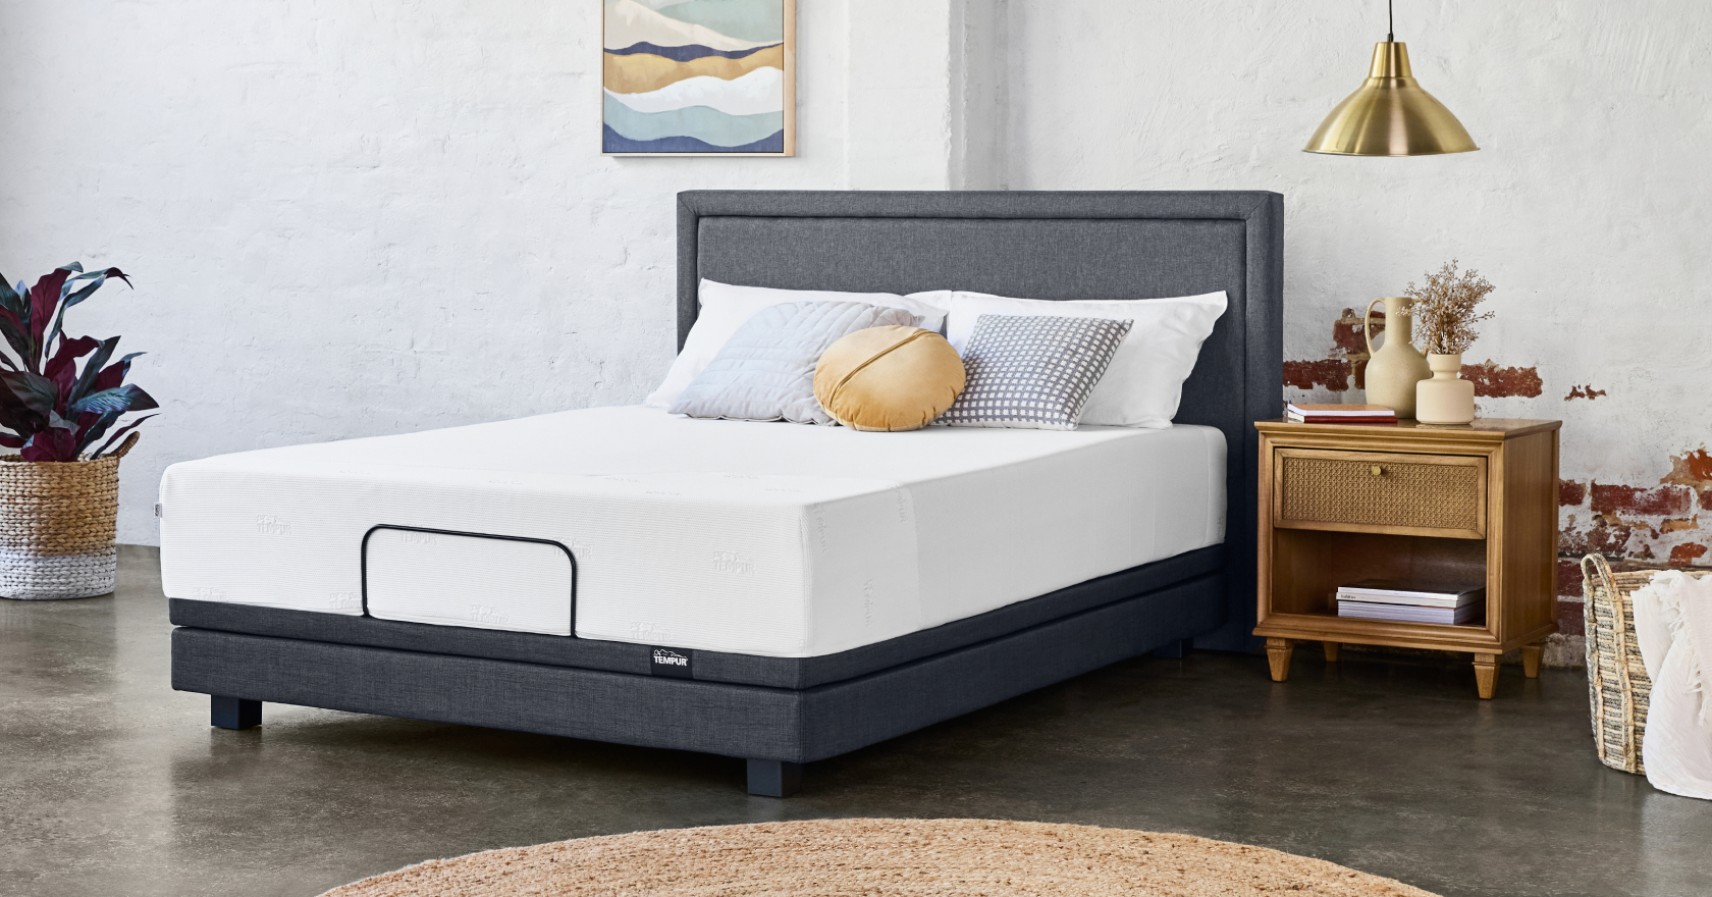 Tempur mattress on a grey upholstered bed frame